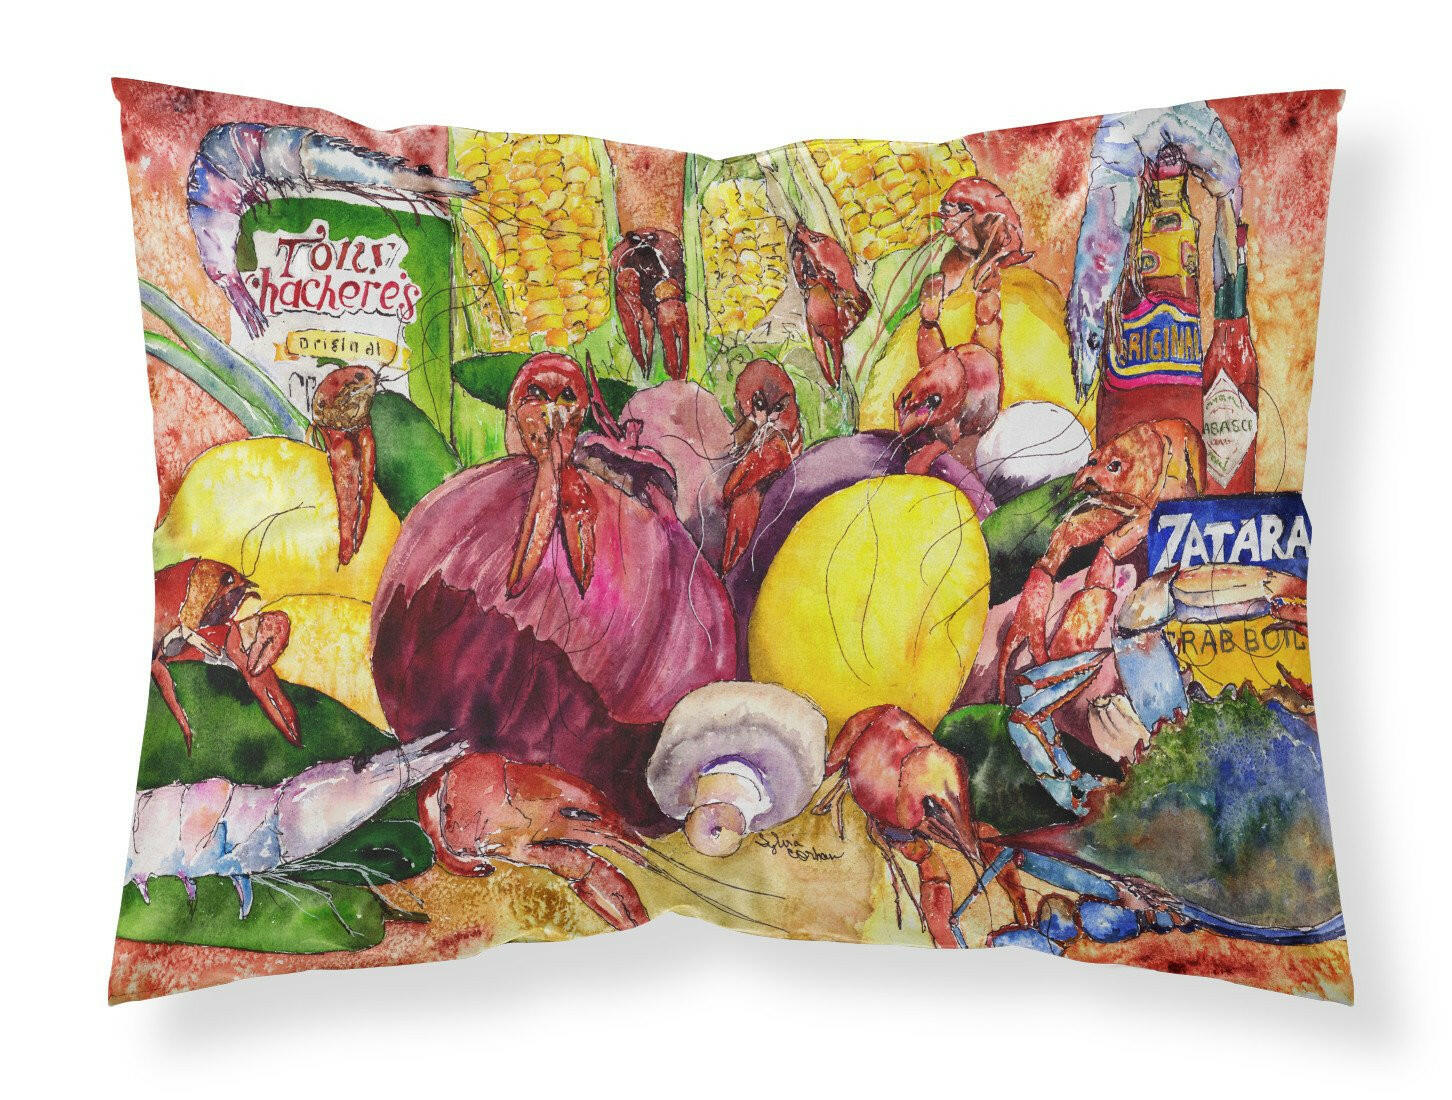 Crawfish with Spices and Corn Fabric Standard Pillowcase 8698PILLOWCASE by Caroline's Treasures